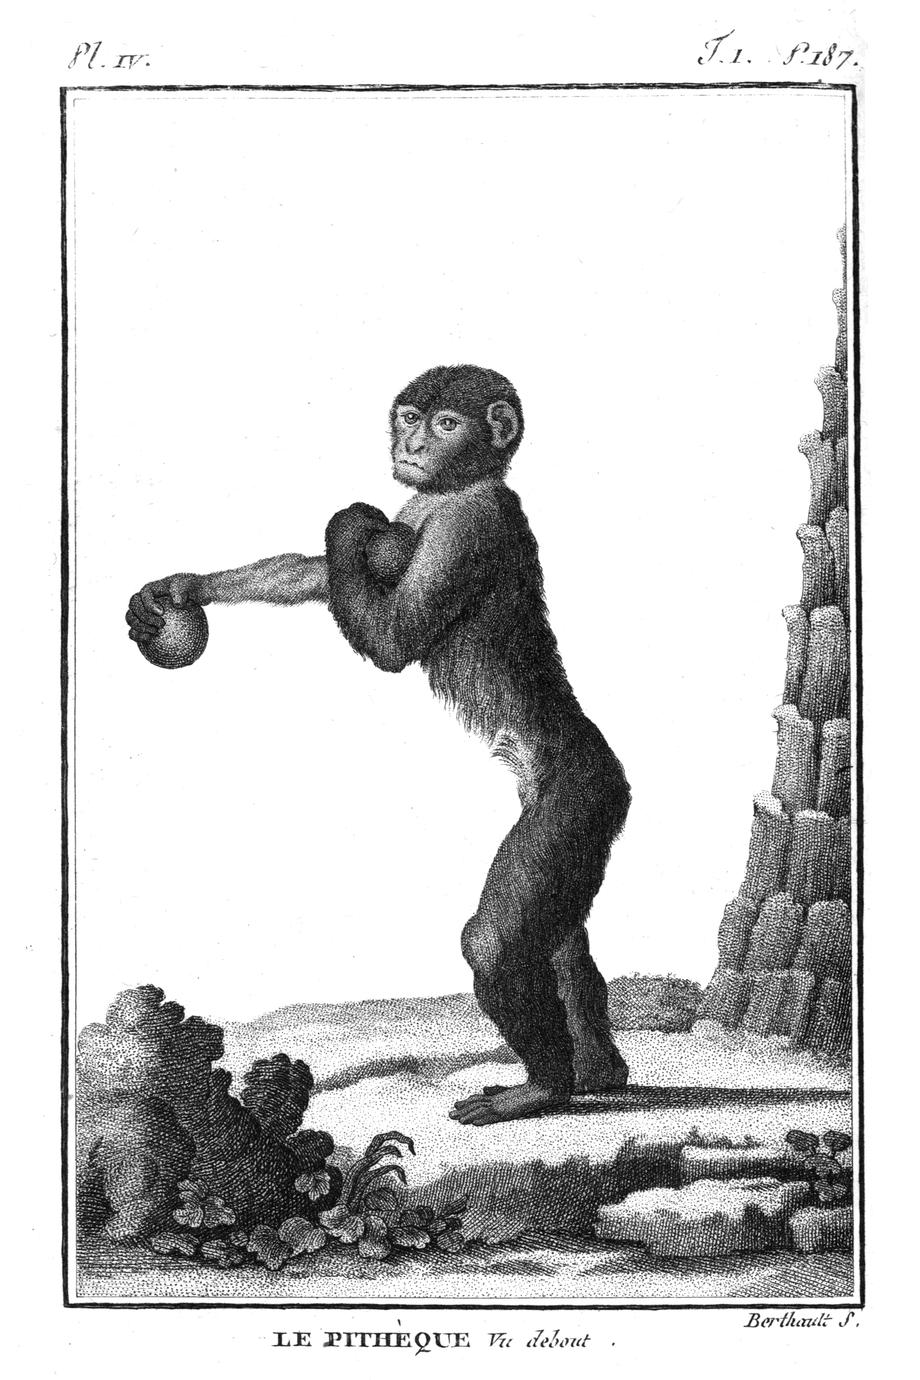 Le Pitheque vu debout (Ape standing upright)